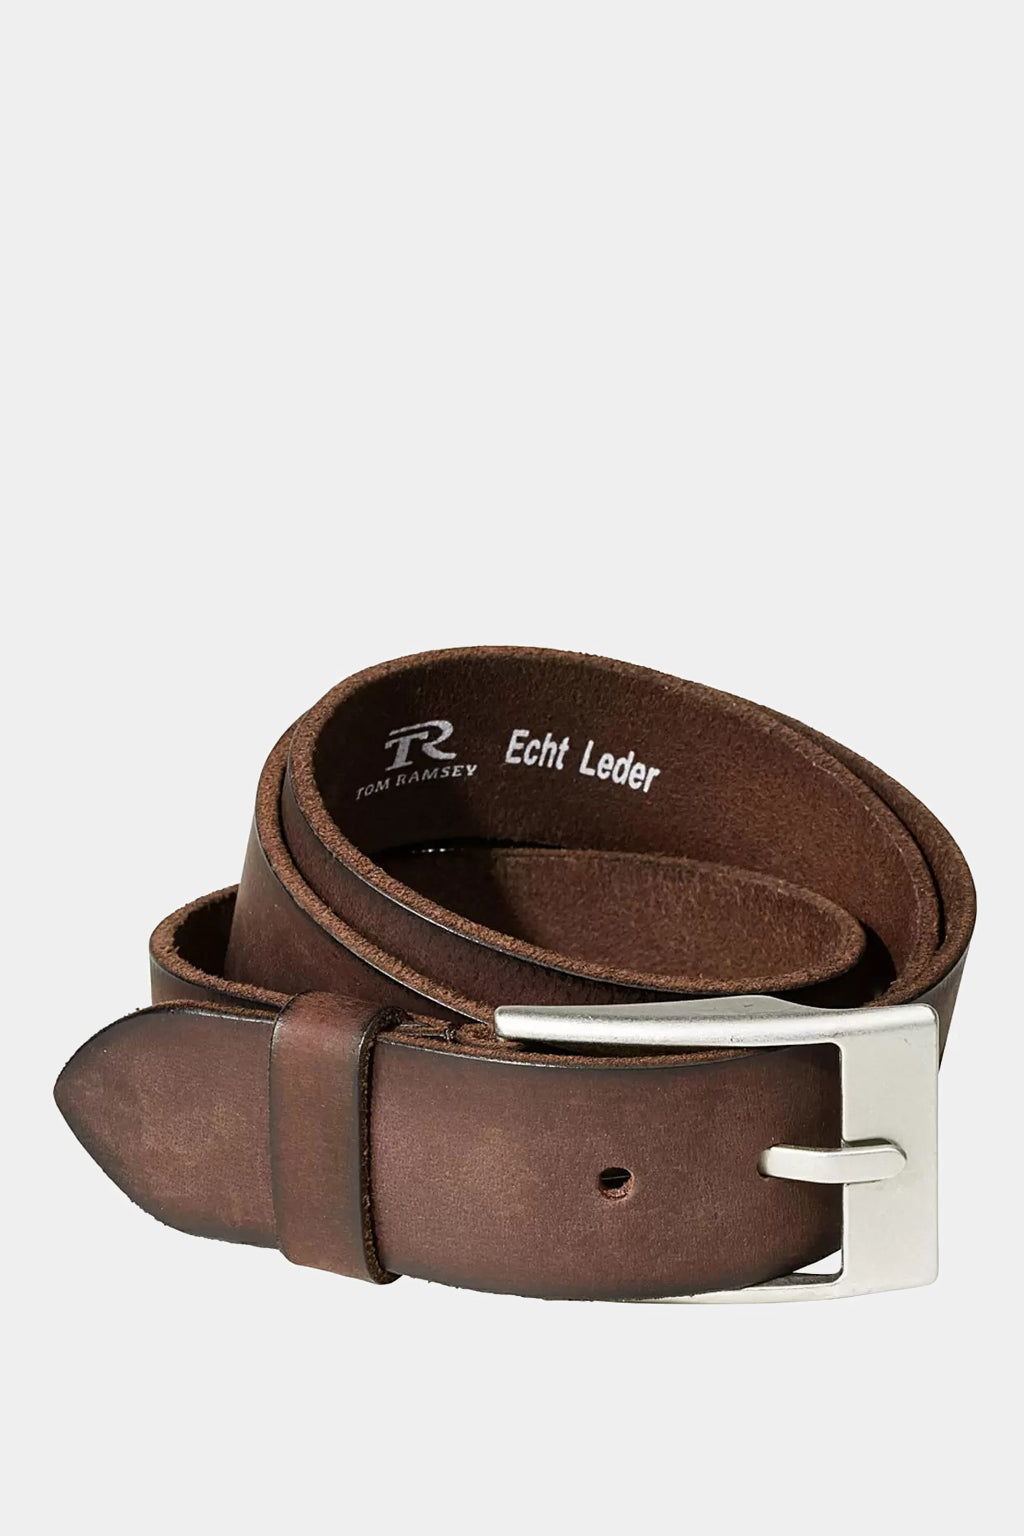 Tom Ramsey - Leather Belt With a Vintage Look